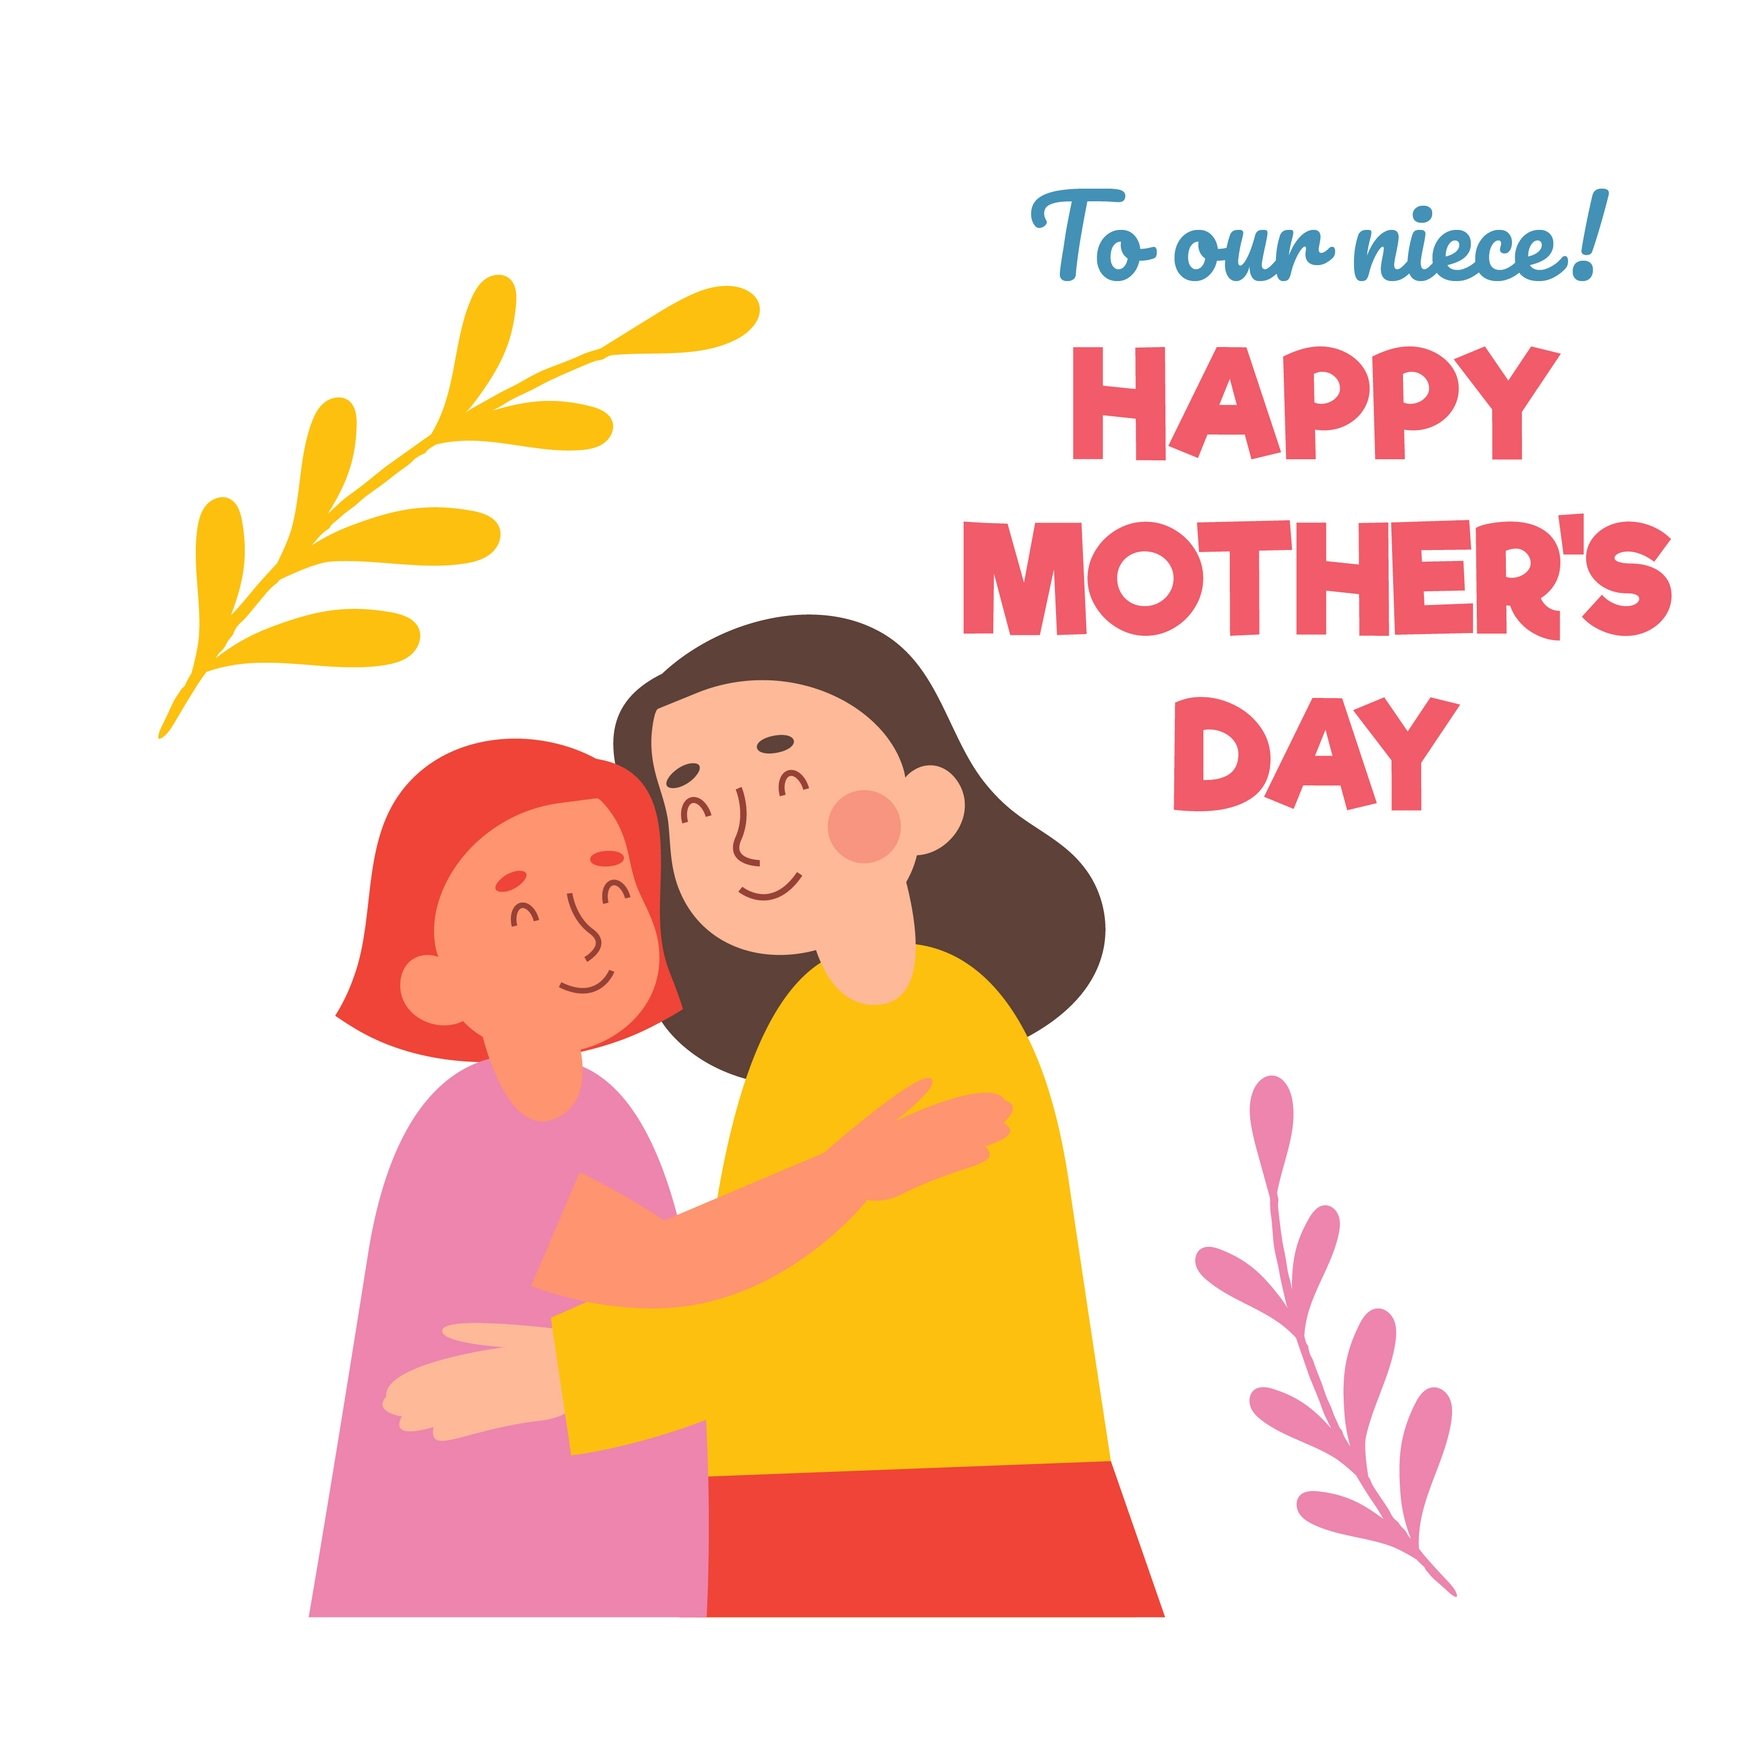 Happy Mother's Day Niece GIF in Illustrator, EPS, SVG, JPG, GIF, PNG, After Effects